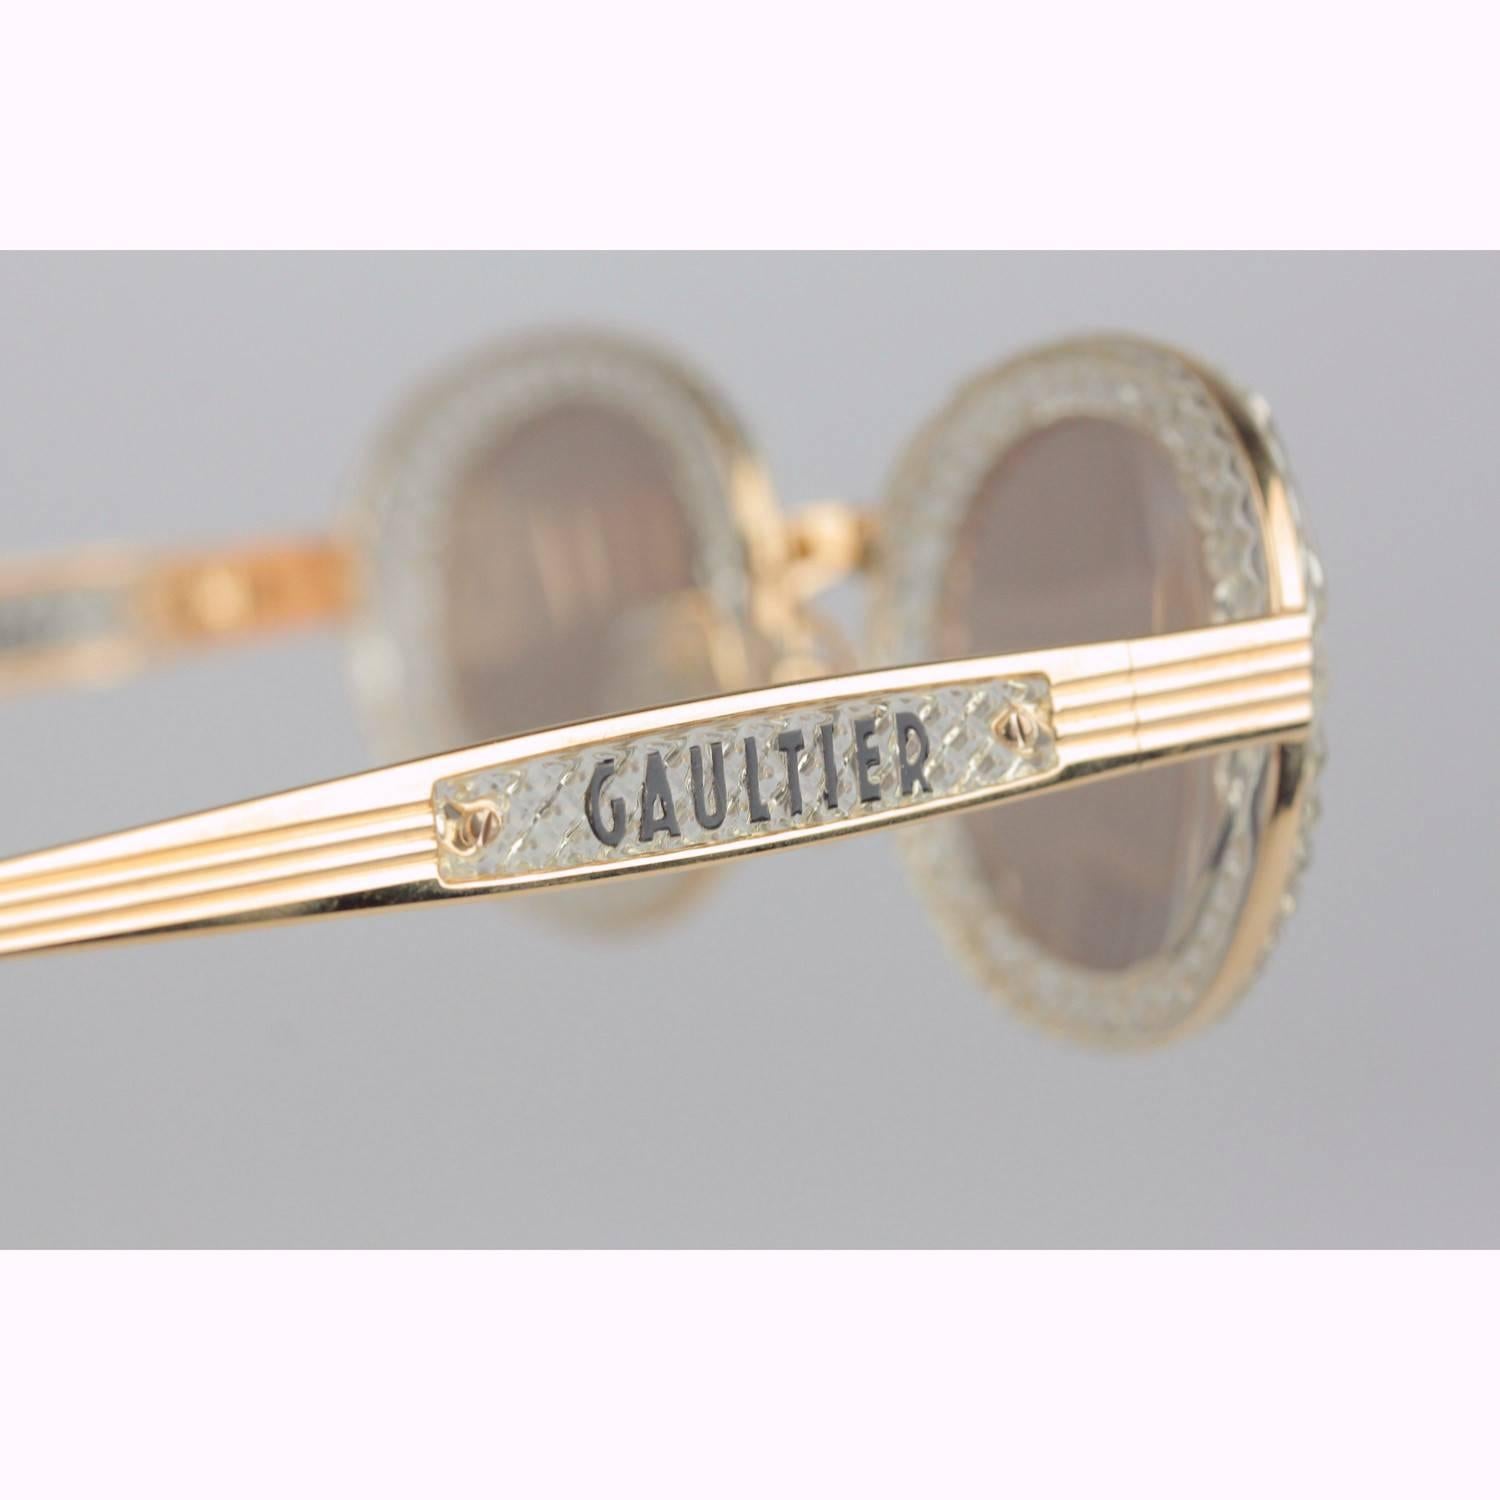 JEAN PAUL GAULTIER Vintage Gold Sunglasses 56-5201 New Old Stock 2